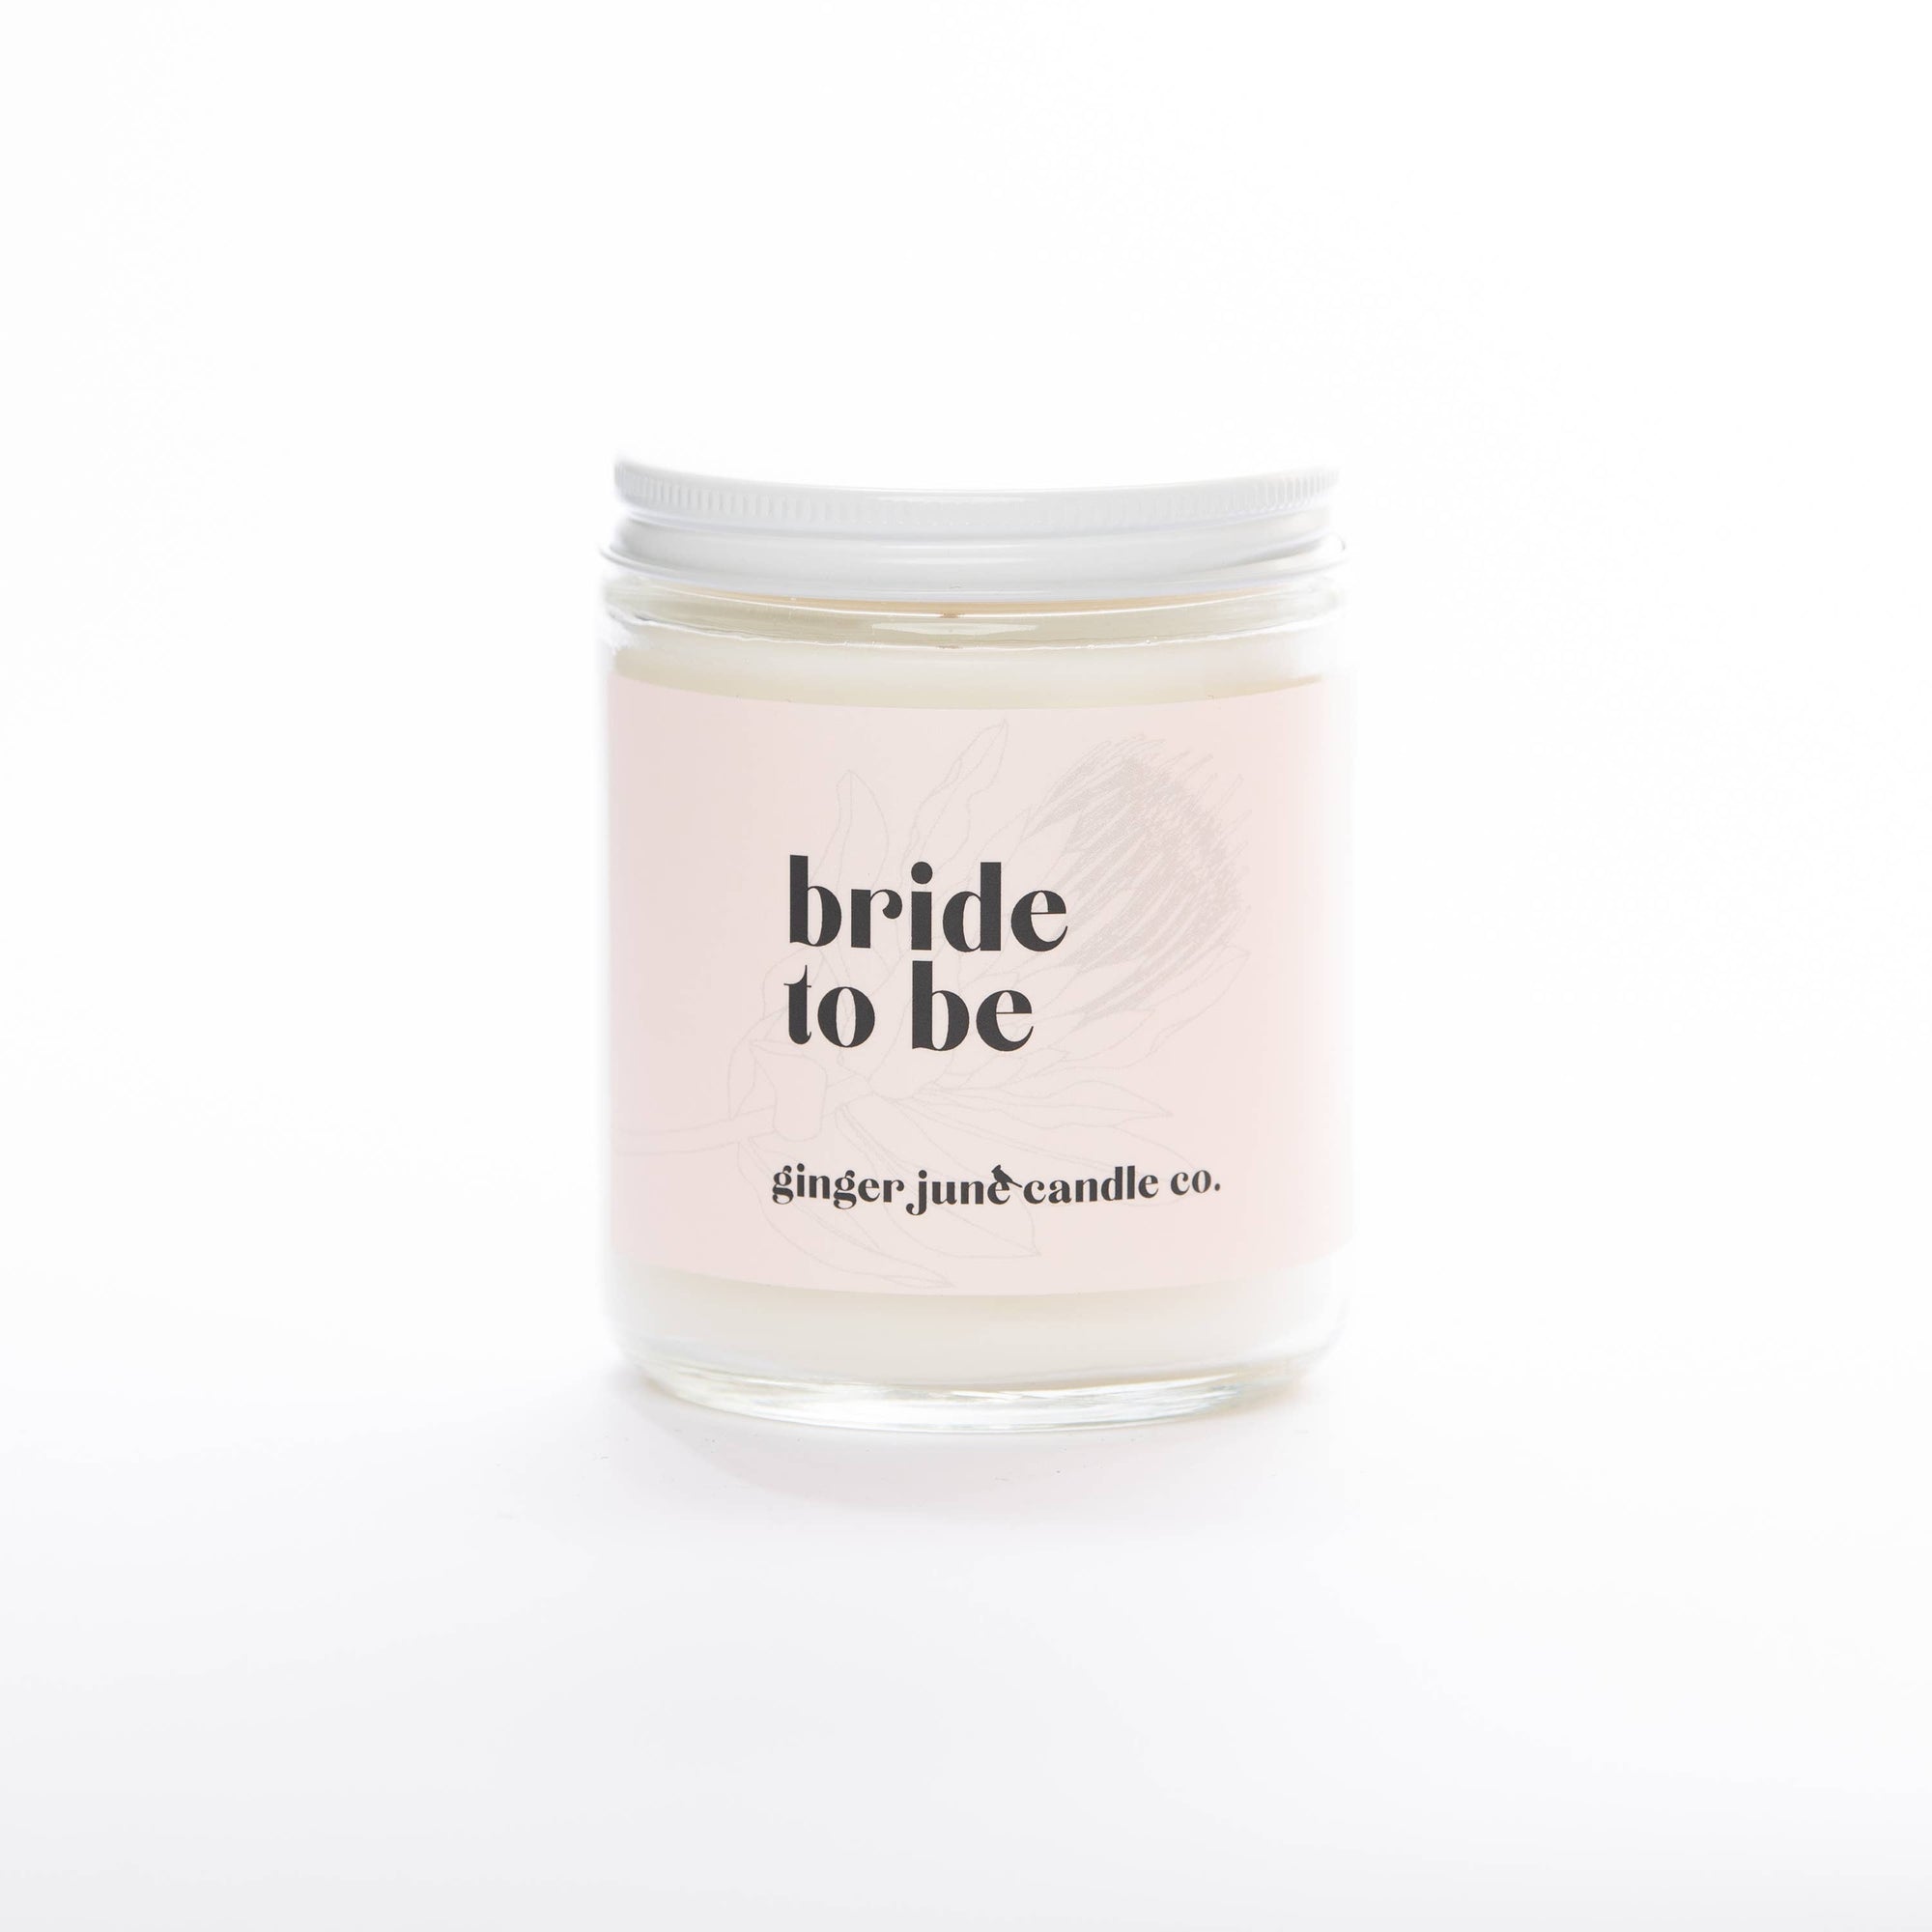 Bride To Be Candle by Ginger June